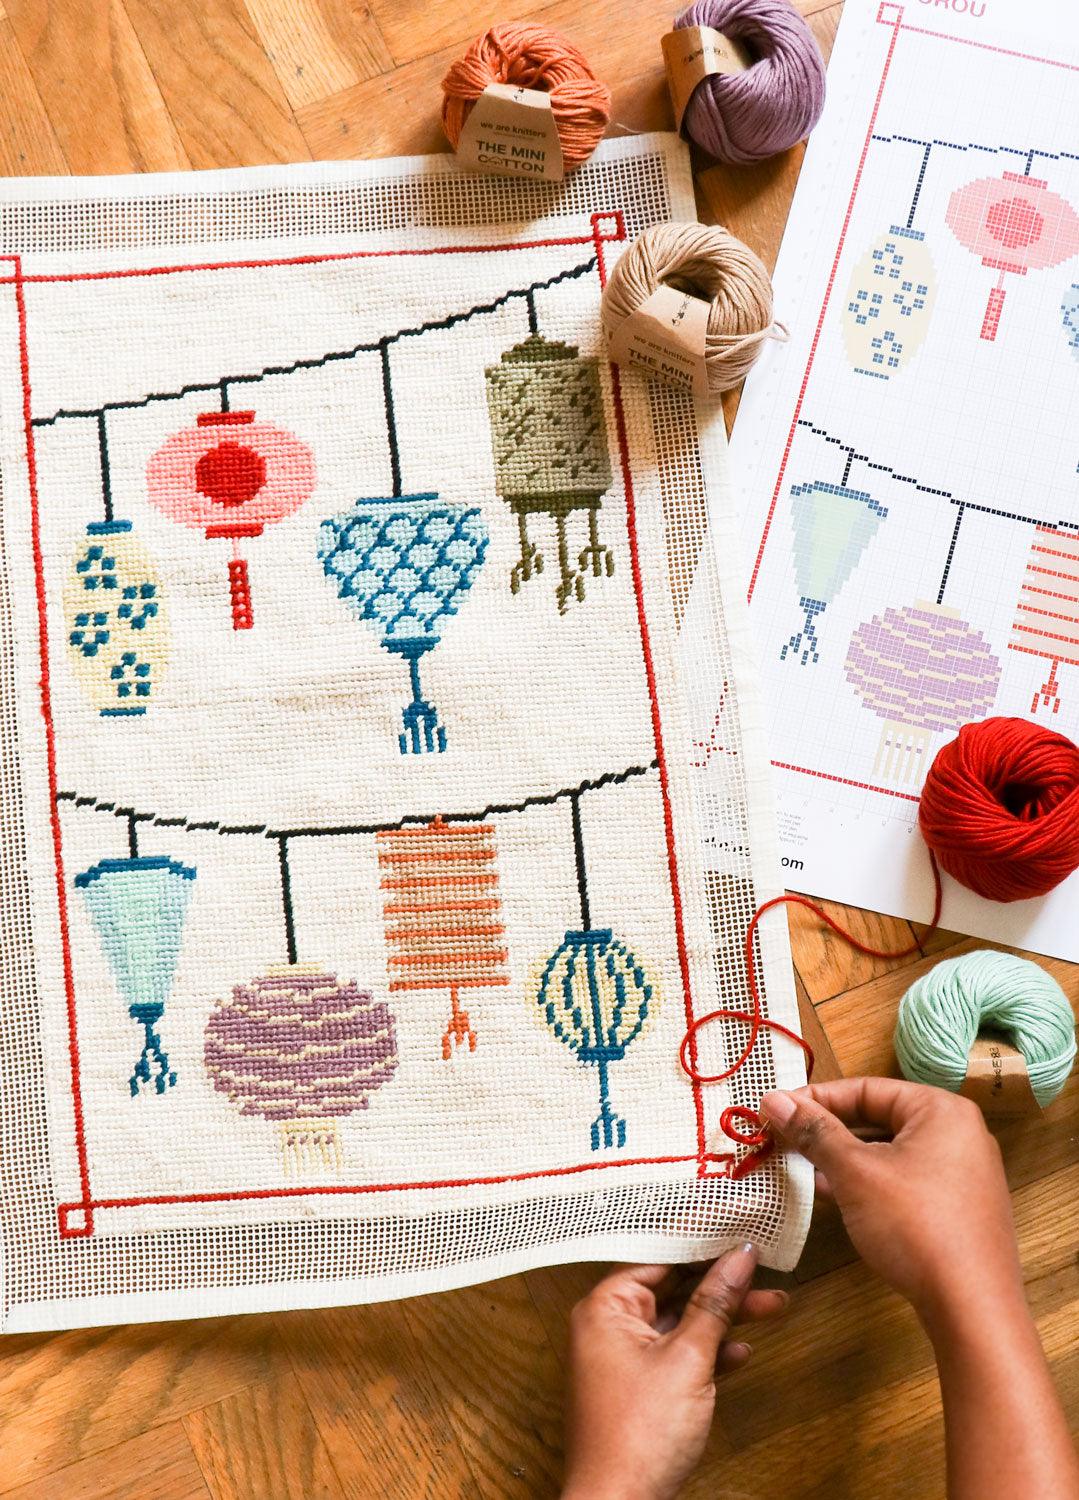 Important Facts About Needlepoint and Petit Point